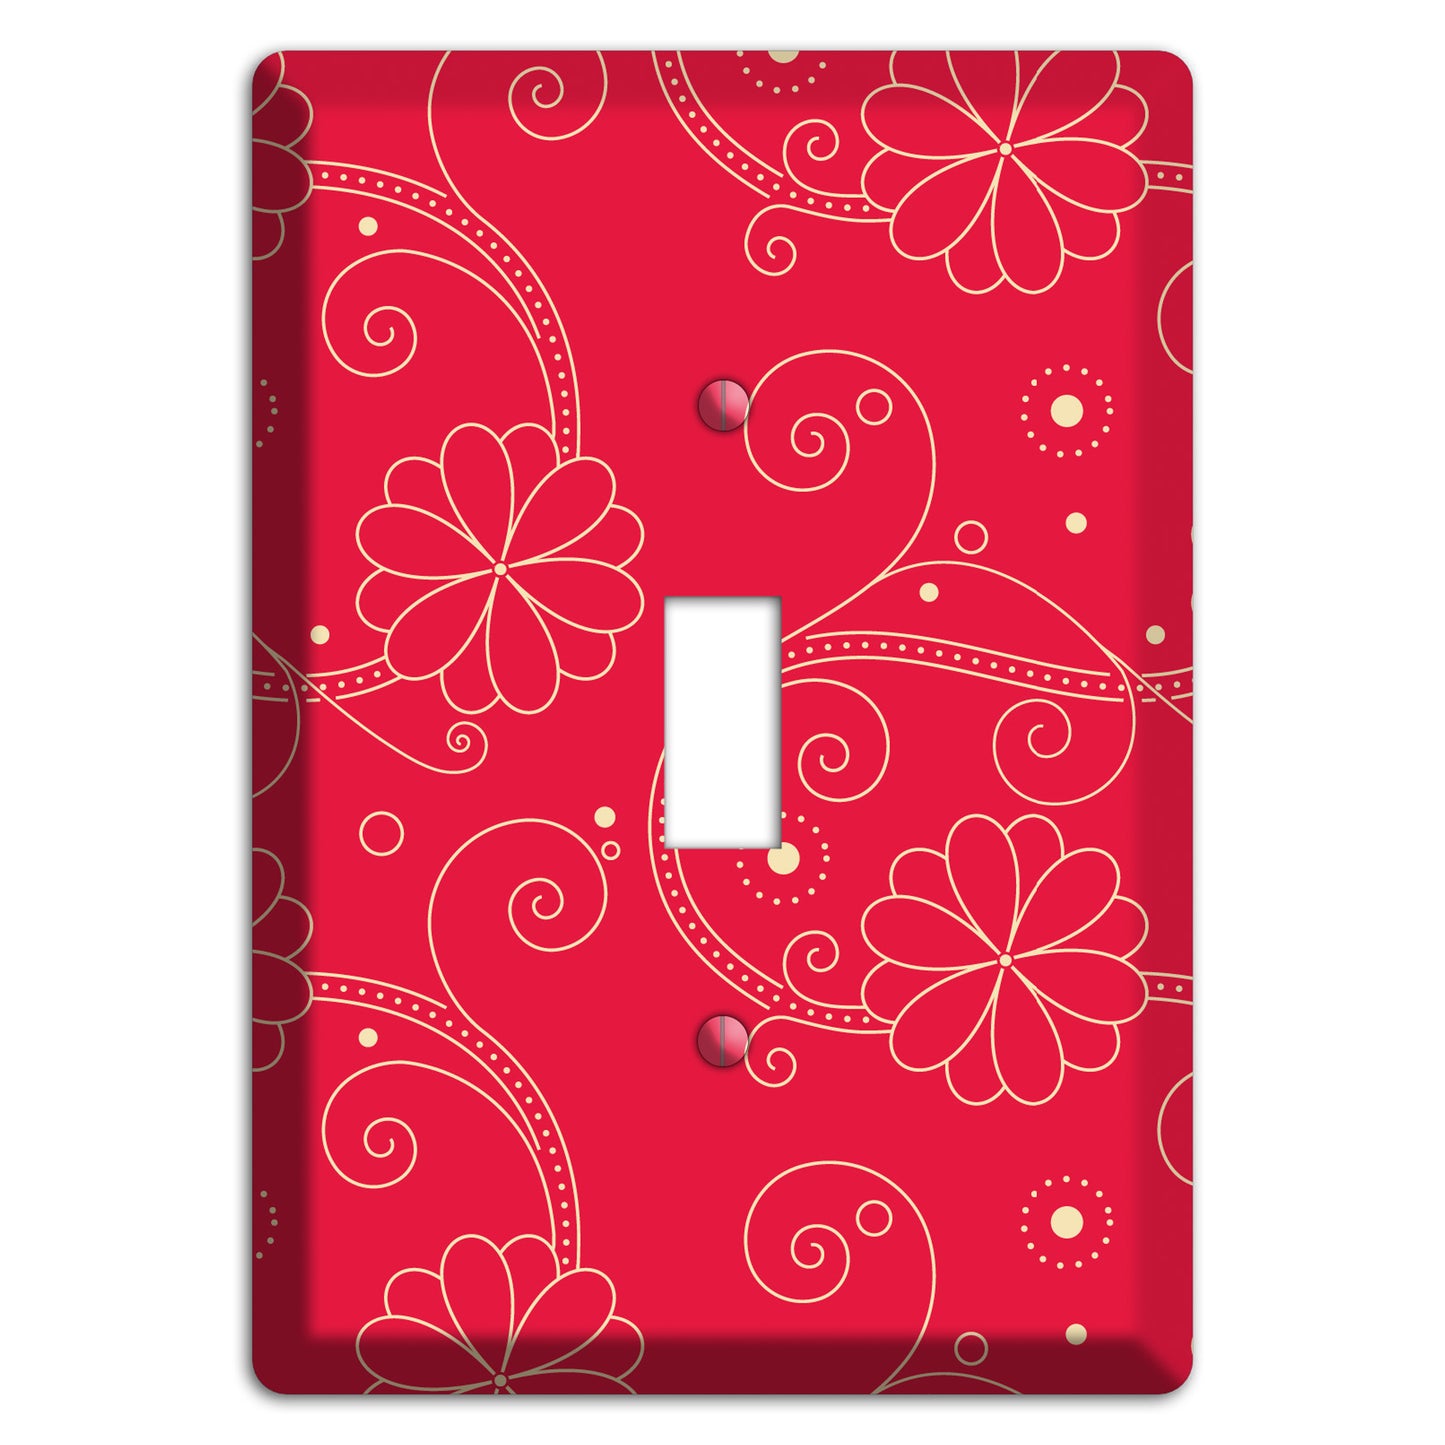 Red Floral Swirl Cover Plates